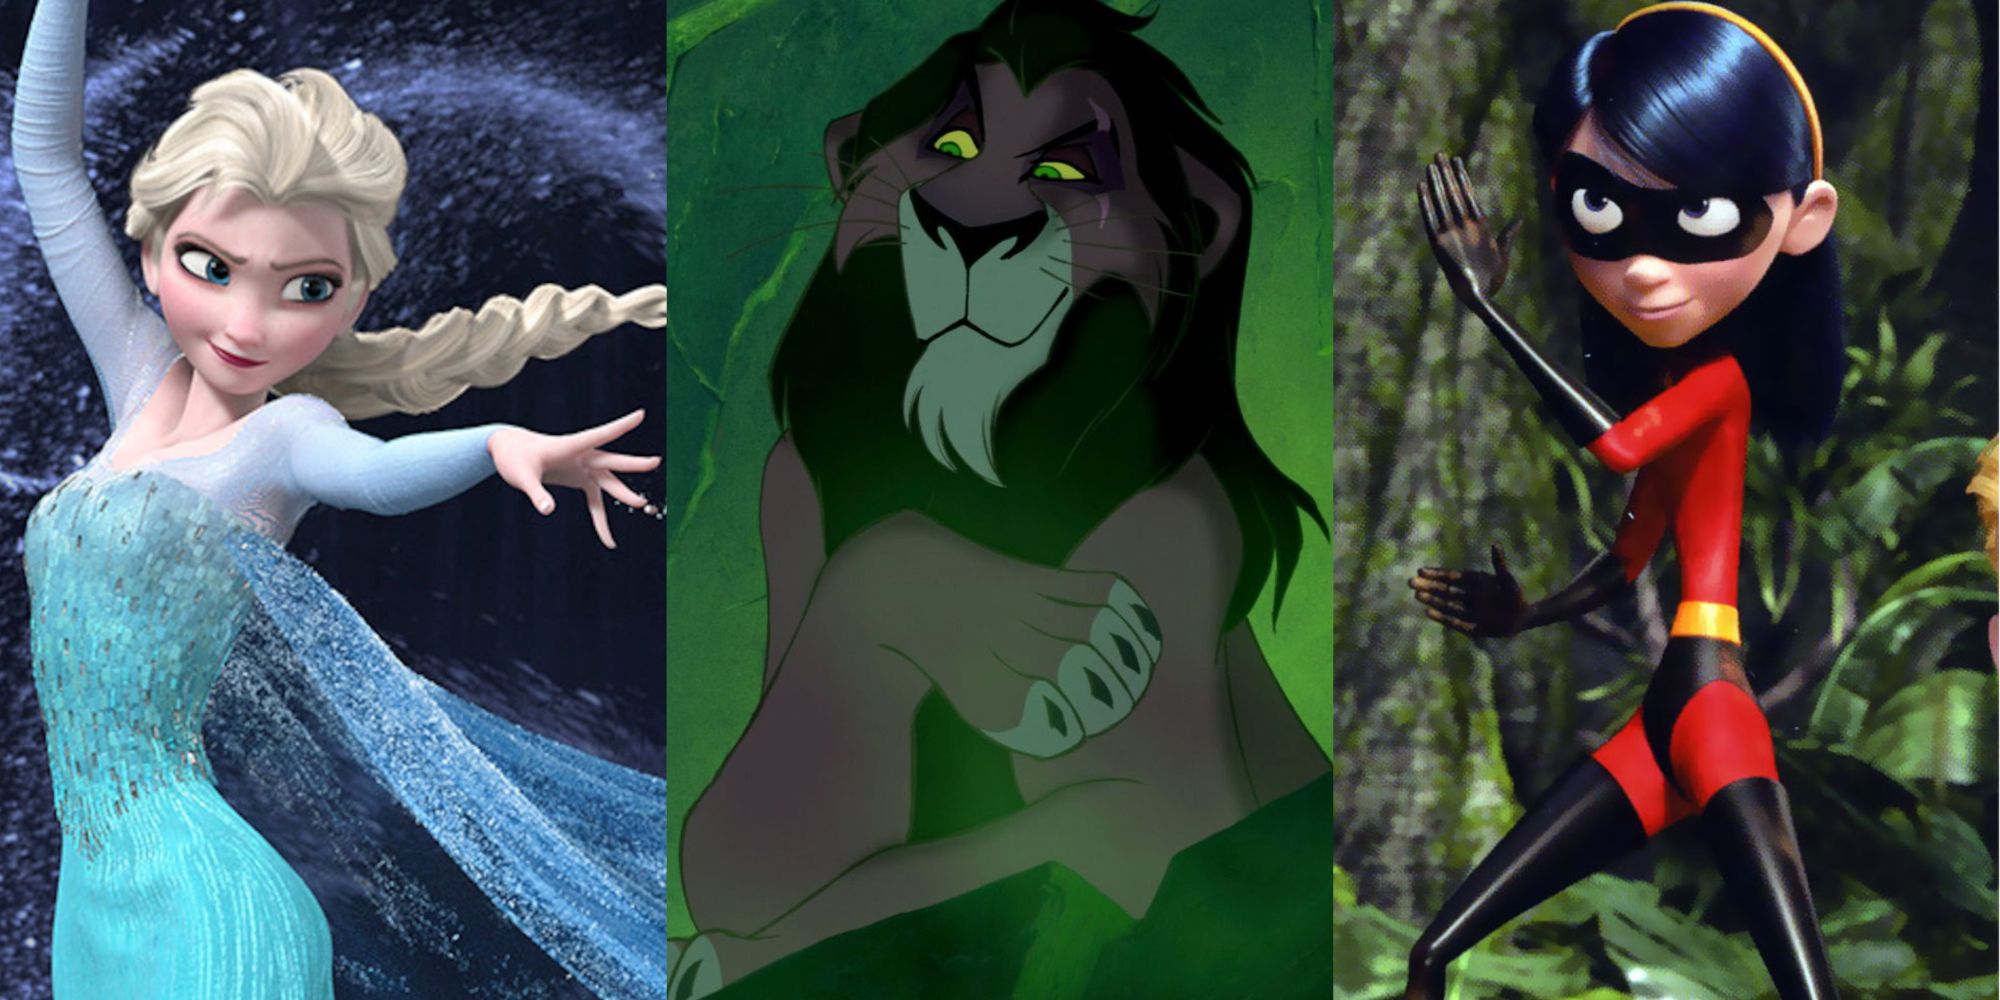 A split image of Elsa from Frozen, Scar from The Lion King, and Violet Parr from The Incredibles 